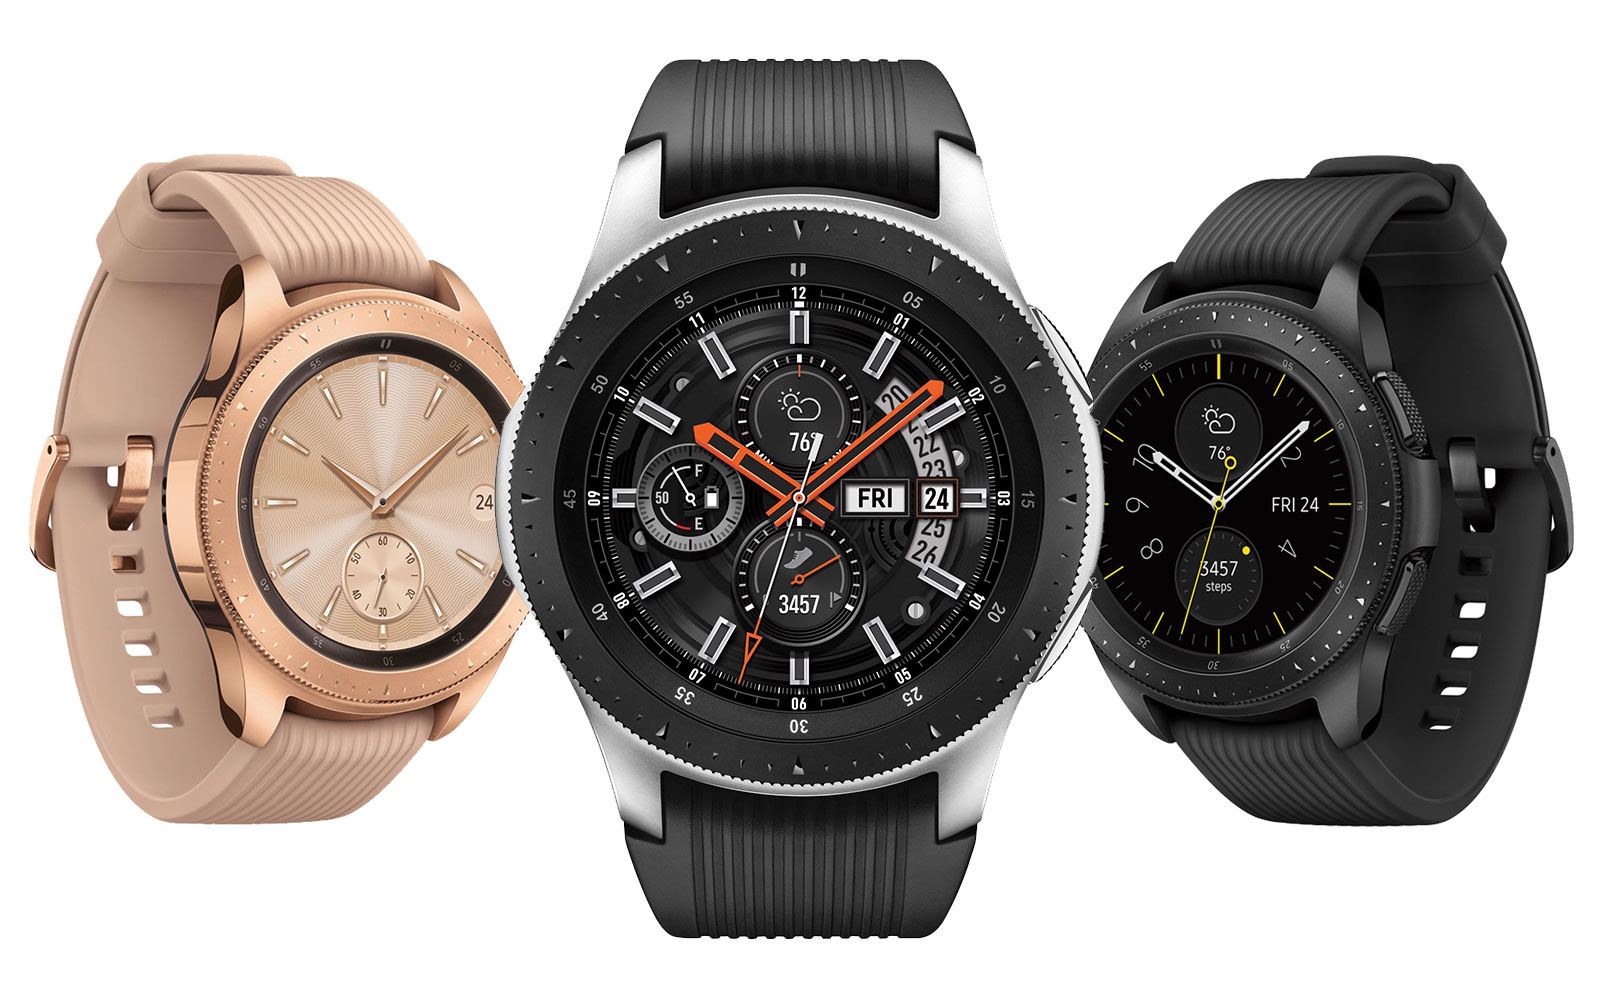 Samsung returns to the smartwatch market by introducing the LTEpowered